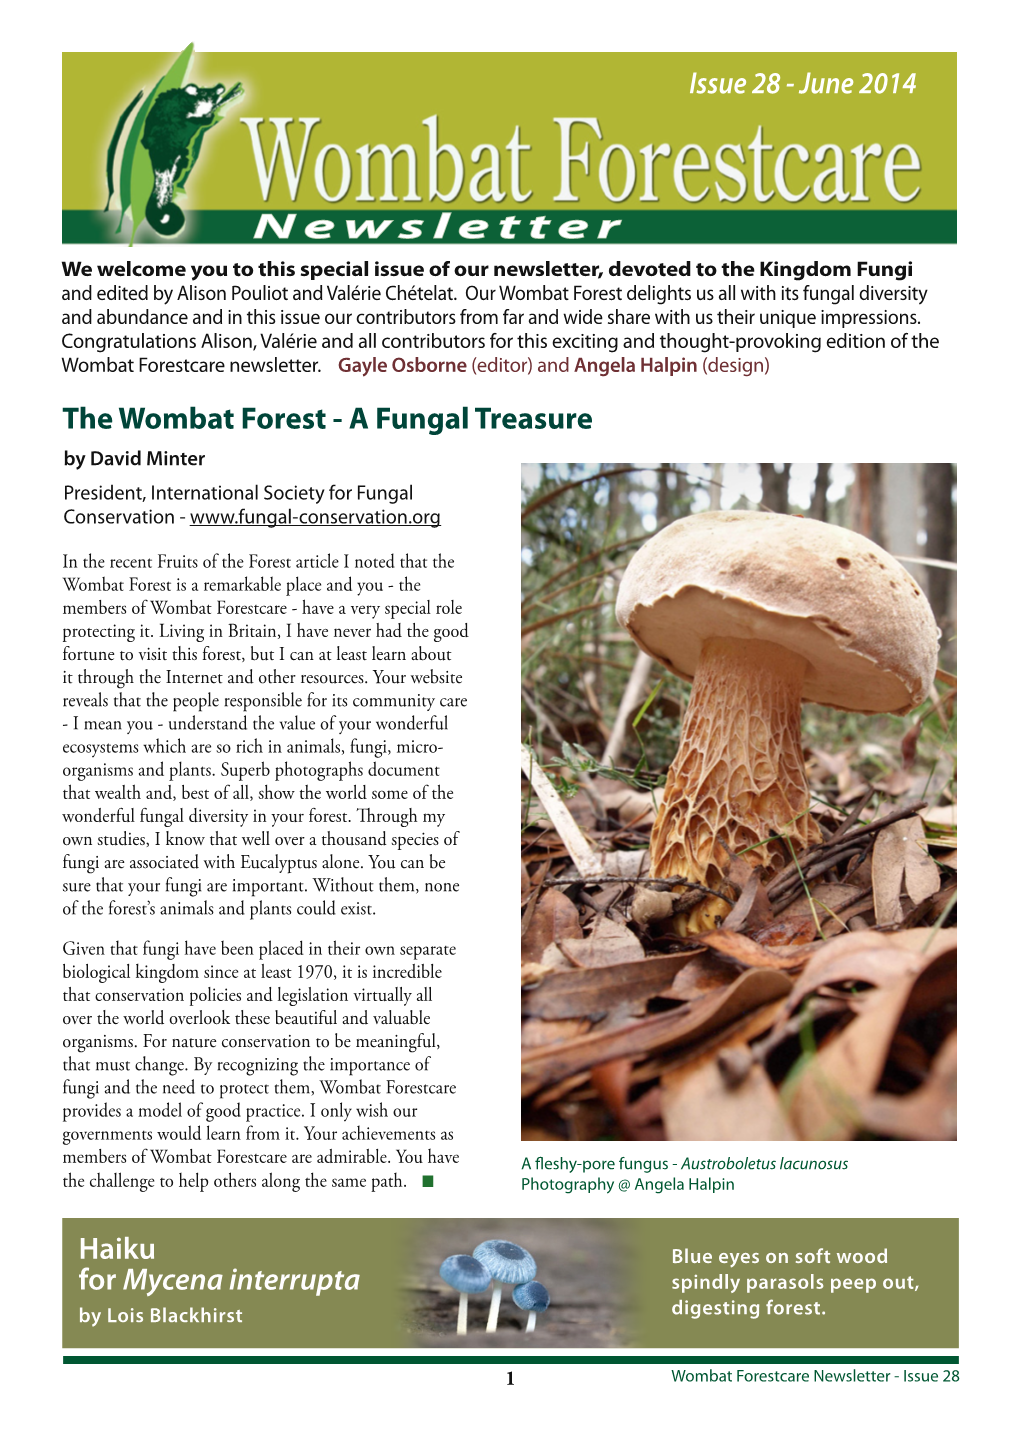 Newsletter We Welcome You to This Special Issue of Our Newsletter, Devoted to the Kingdom Fungi and Edited by Alison Pouliot and Valérie Chételat